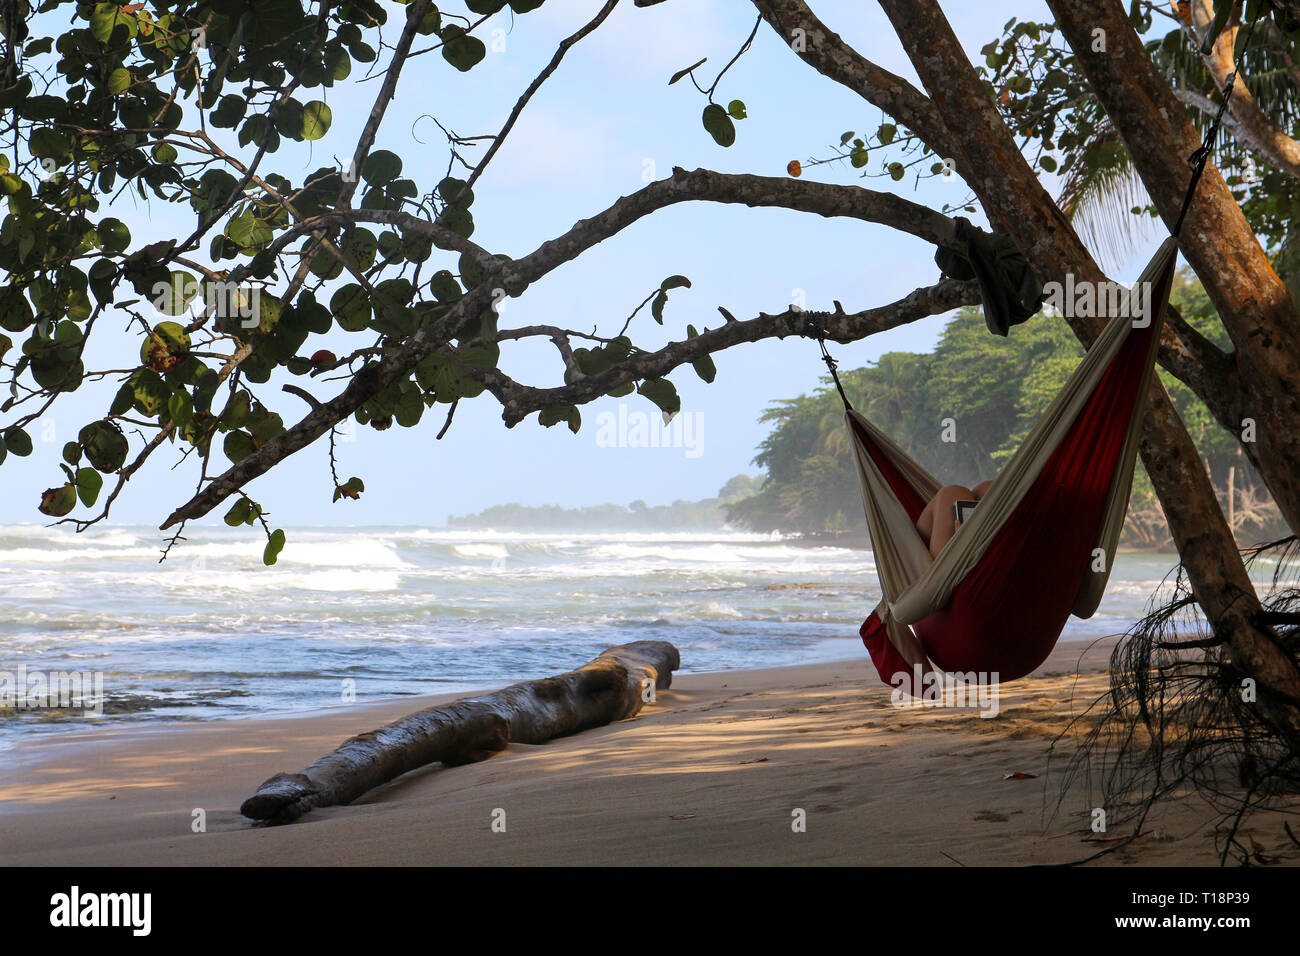 Keep calm and relax in a hammock Stock Photo